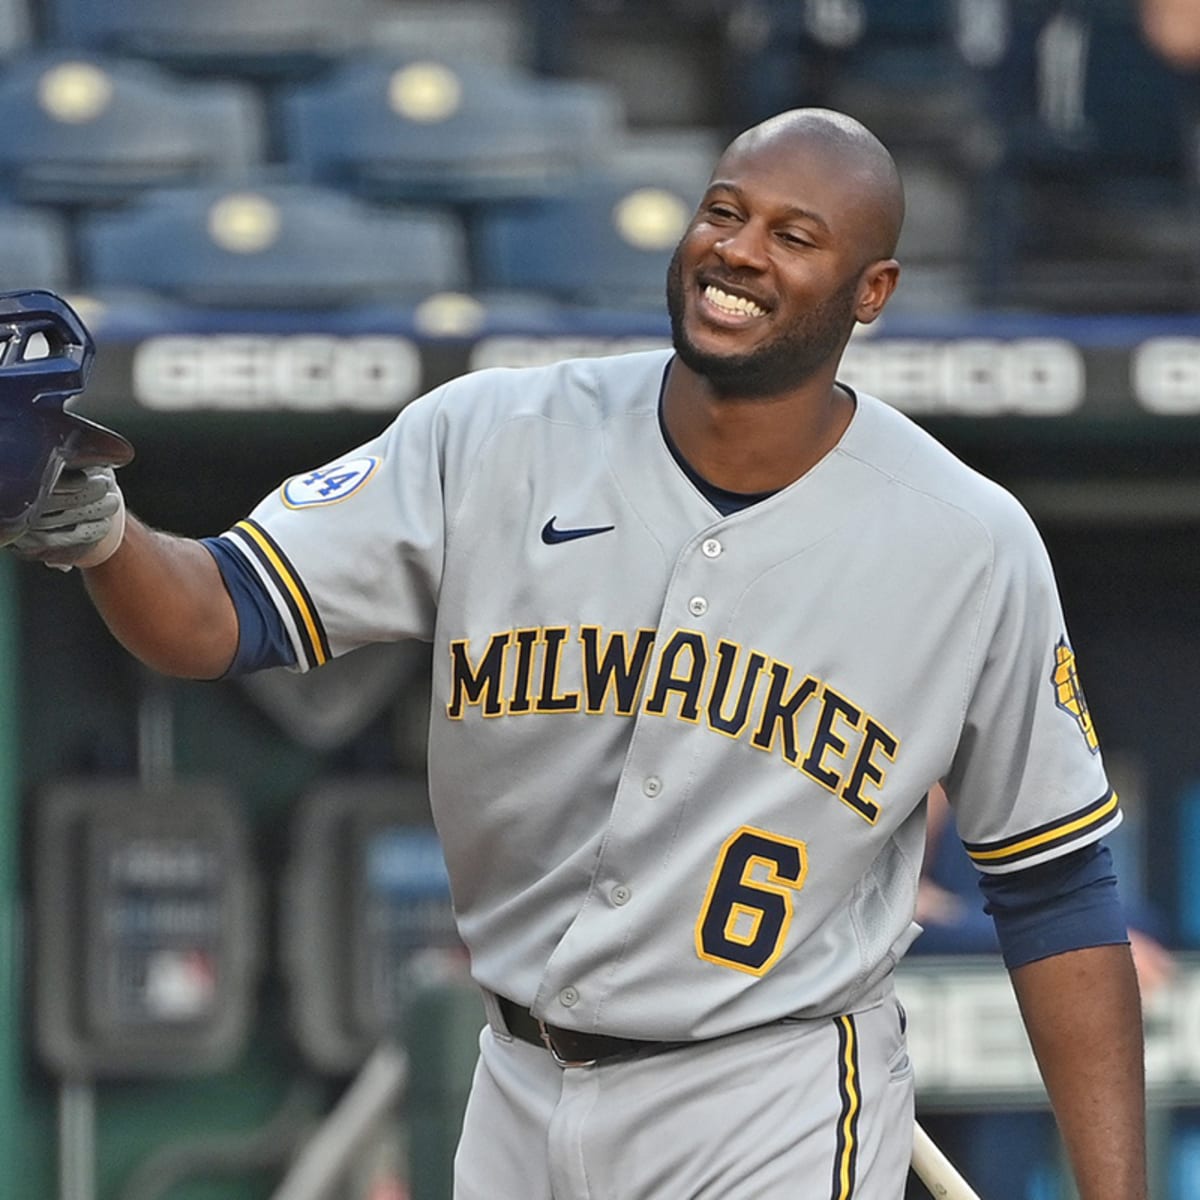 Lorenzo Cain snubbed, Brewers shut out in Gold Glove awards - Brew